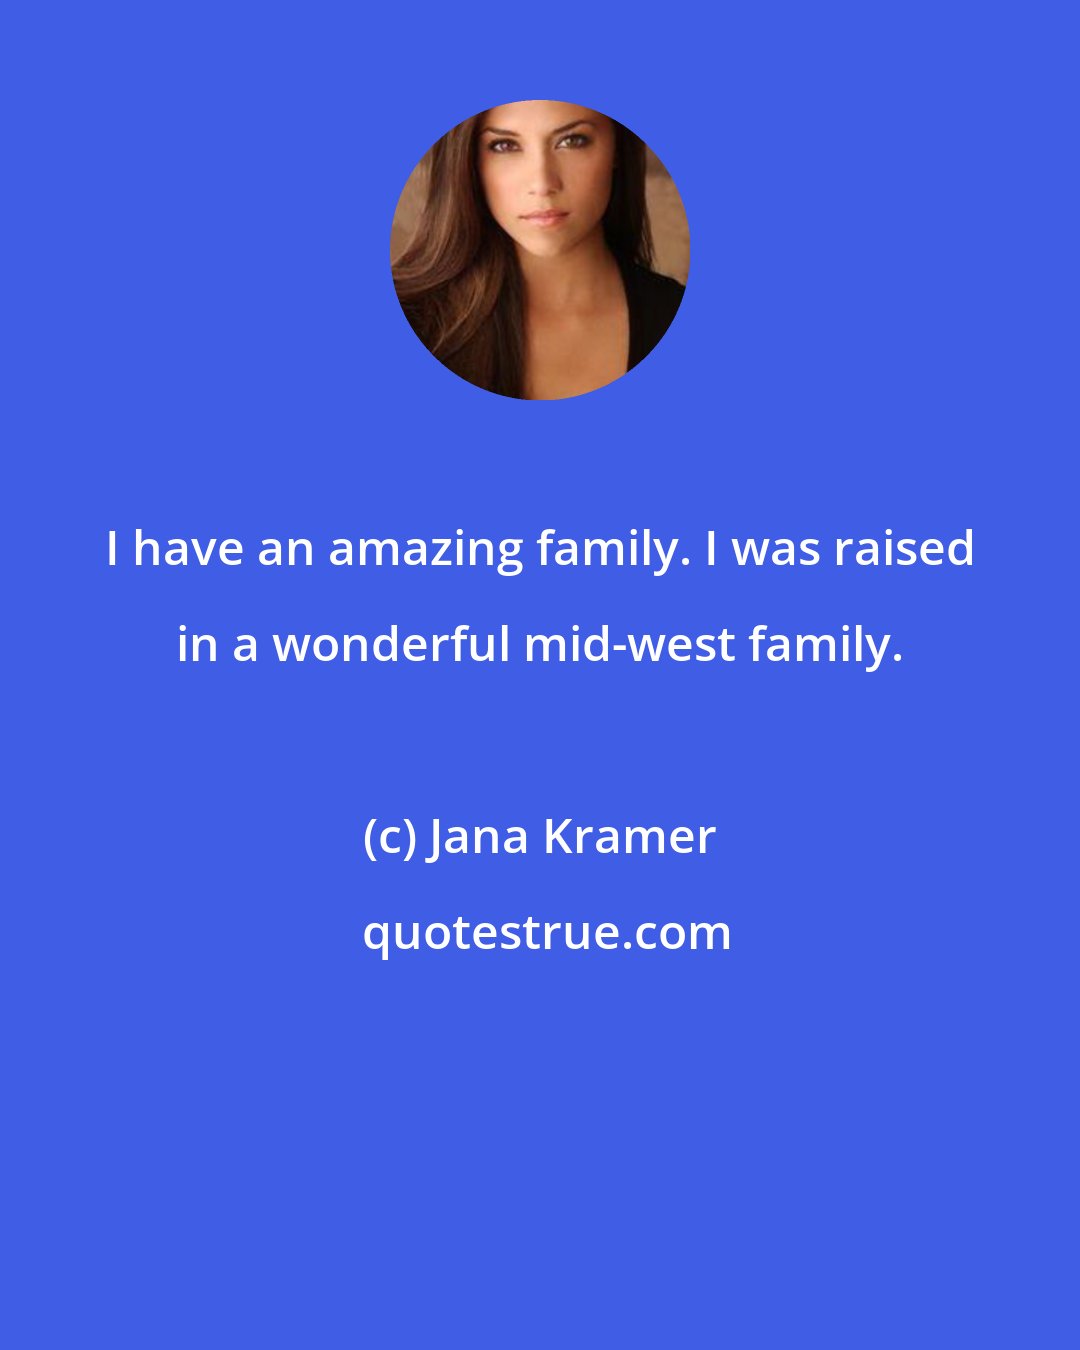 Jana Kramer: I have an amazing family. I was raised in a wonderful mid-west family.